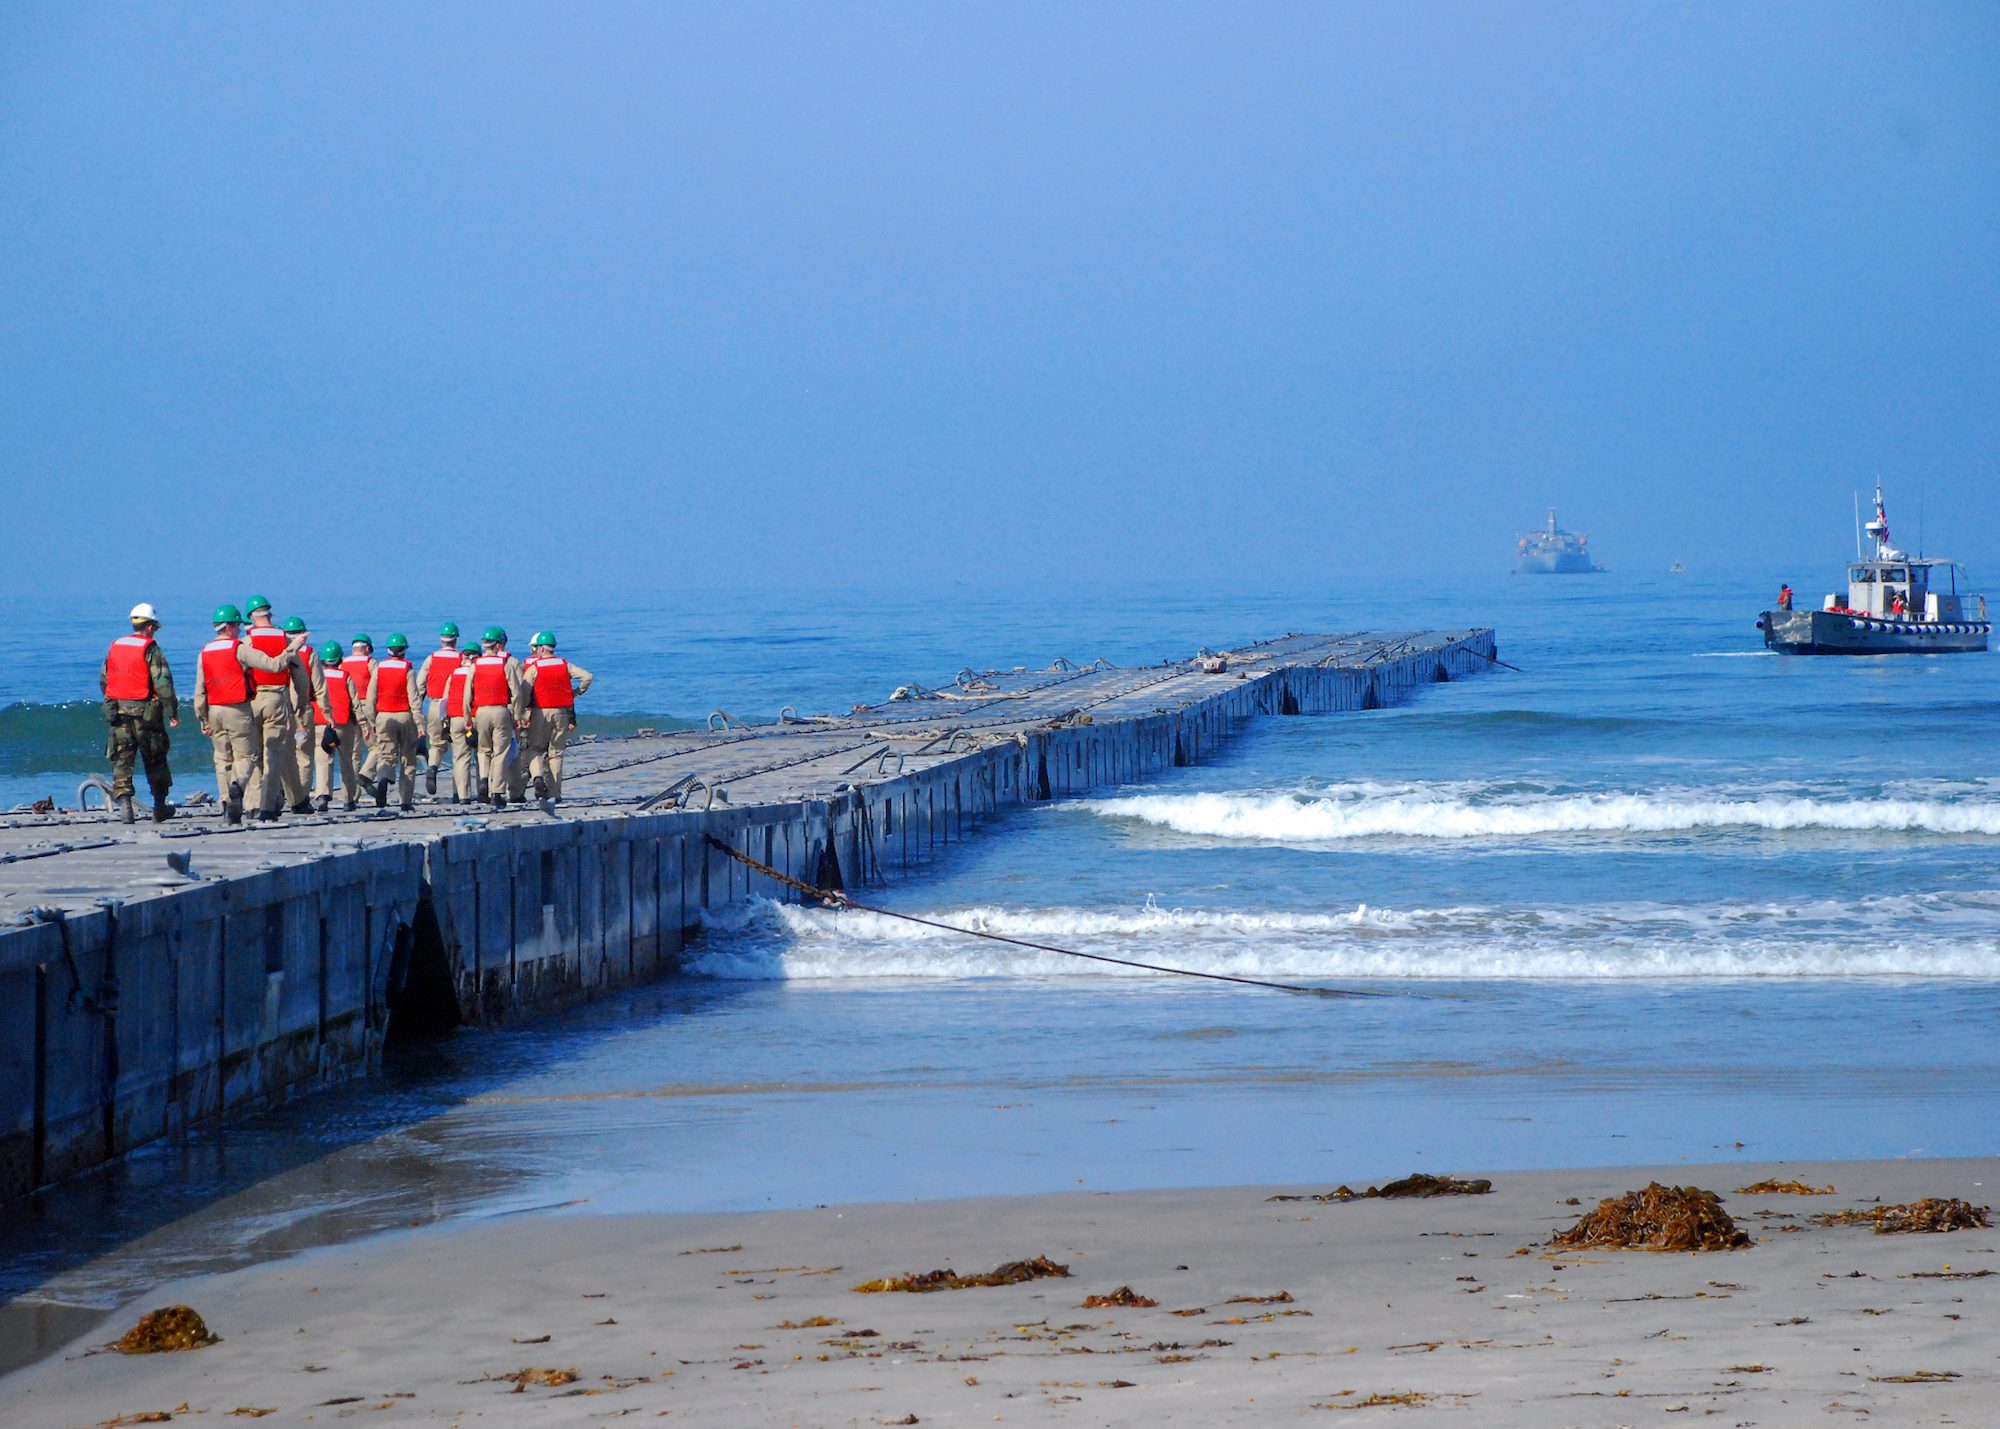 FILE PHOTO: Midshipmen walk along the Joint Logistics Over-The-Shore (JLOTS) Admin Pier, an 800-foot long, small-craft pier, created by attaching non-powered Navy lighterage causeway sections together. U.S. Navy photo taken on July 15, 2008.